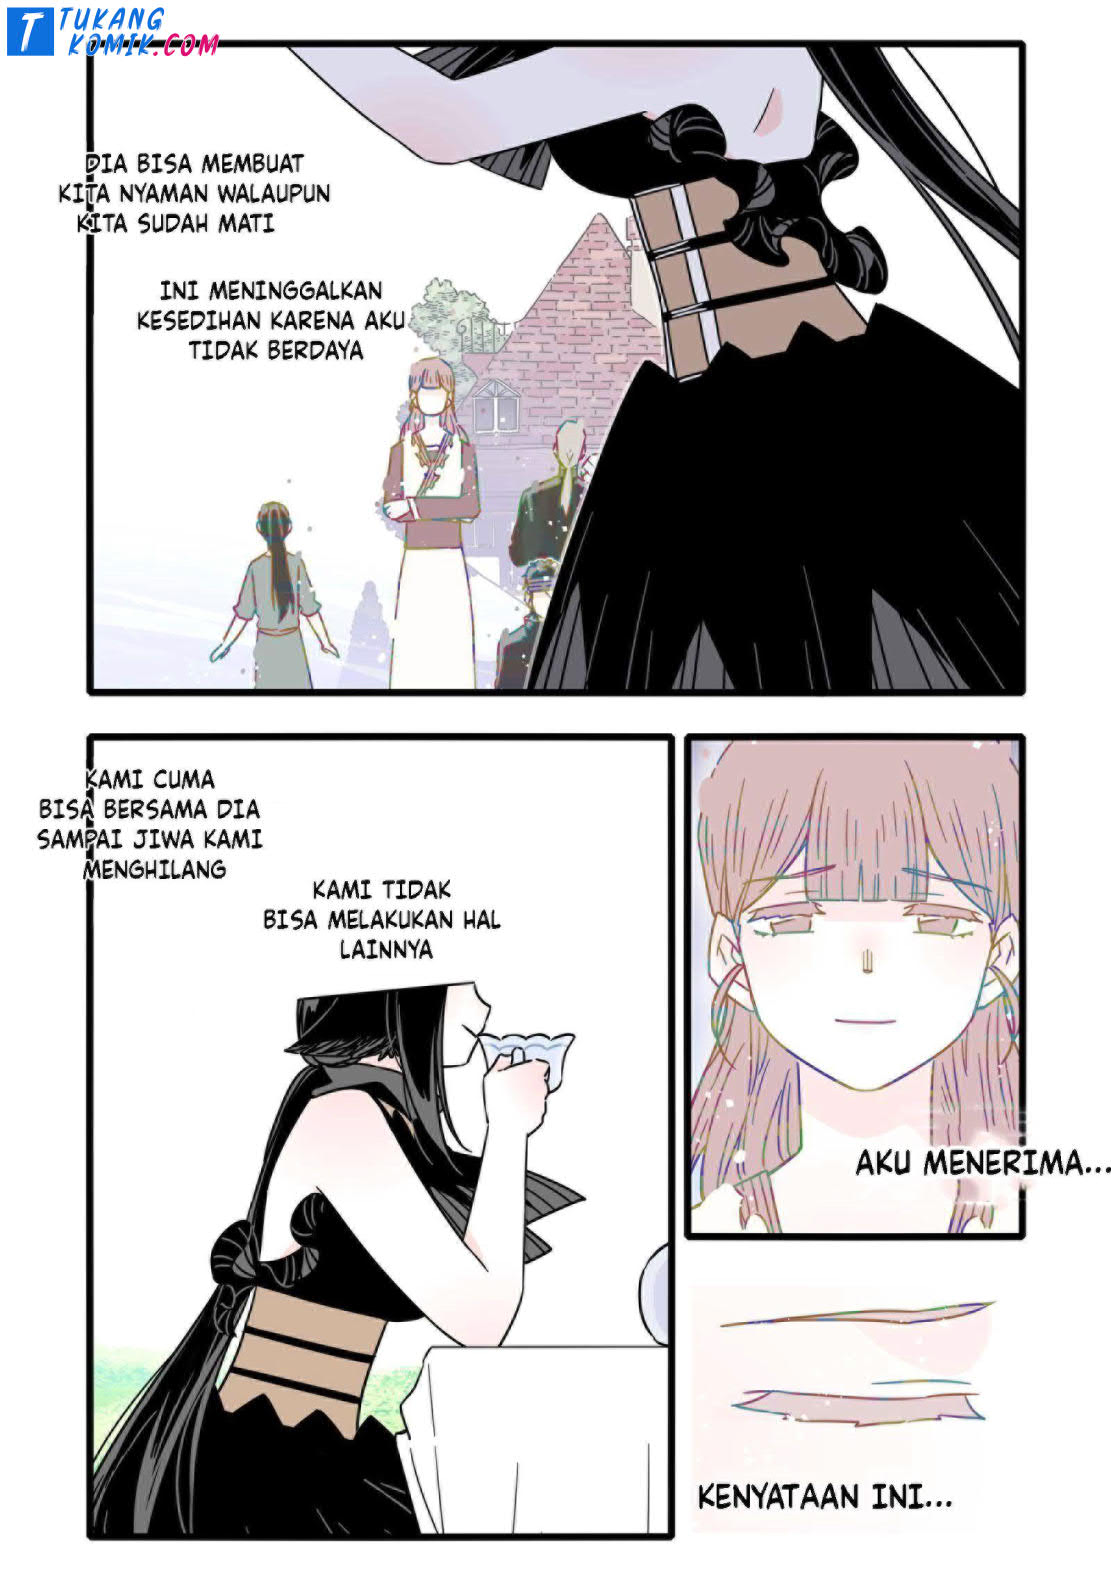 brainless-witch Chapter 40